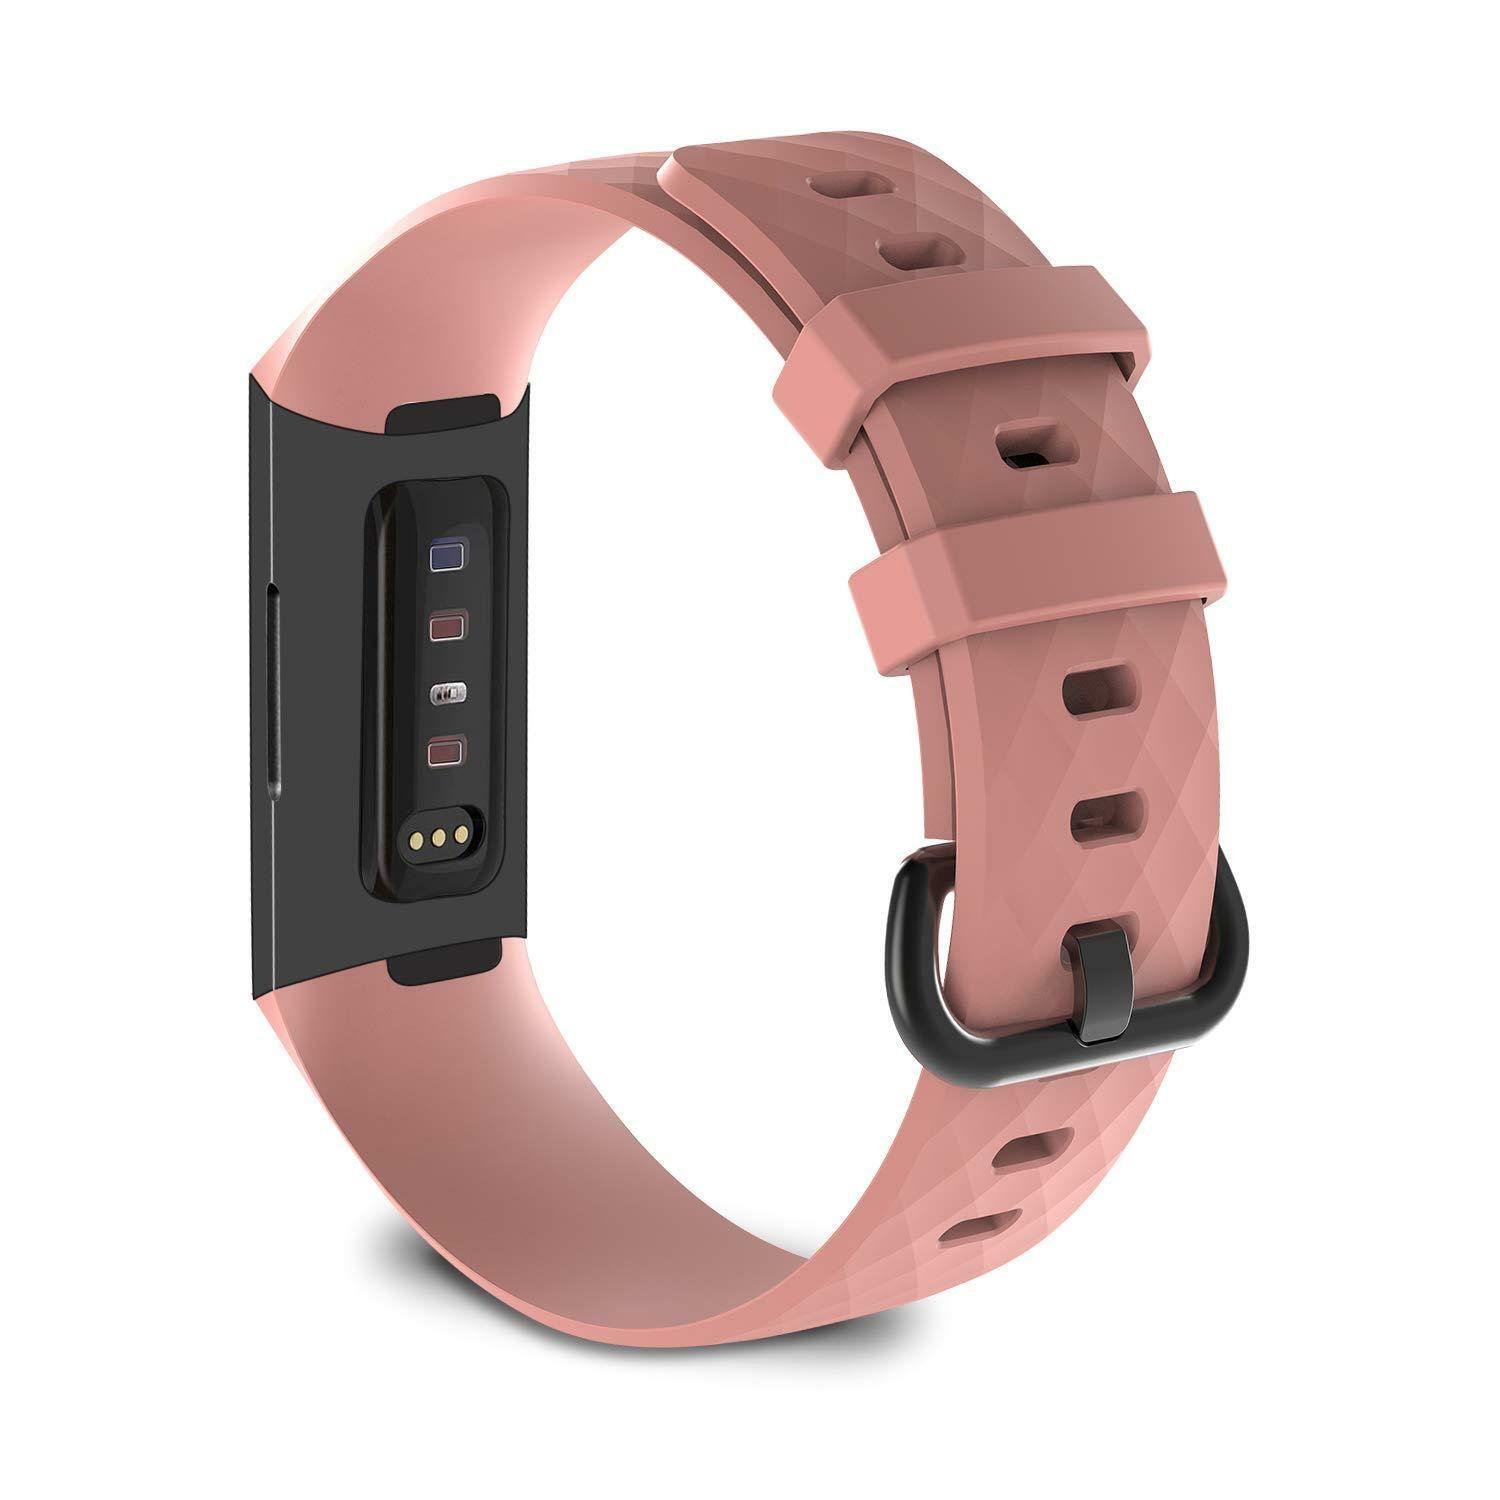 Accessory Band Replacement for Fitbit Flex Wristband Brown Pink 